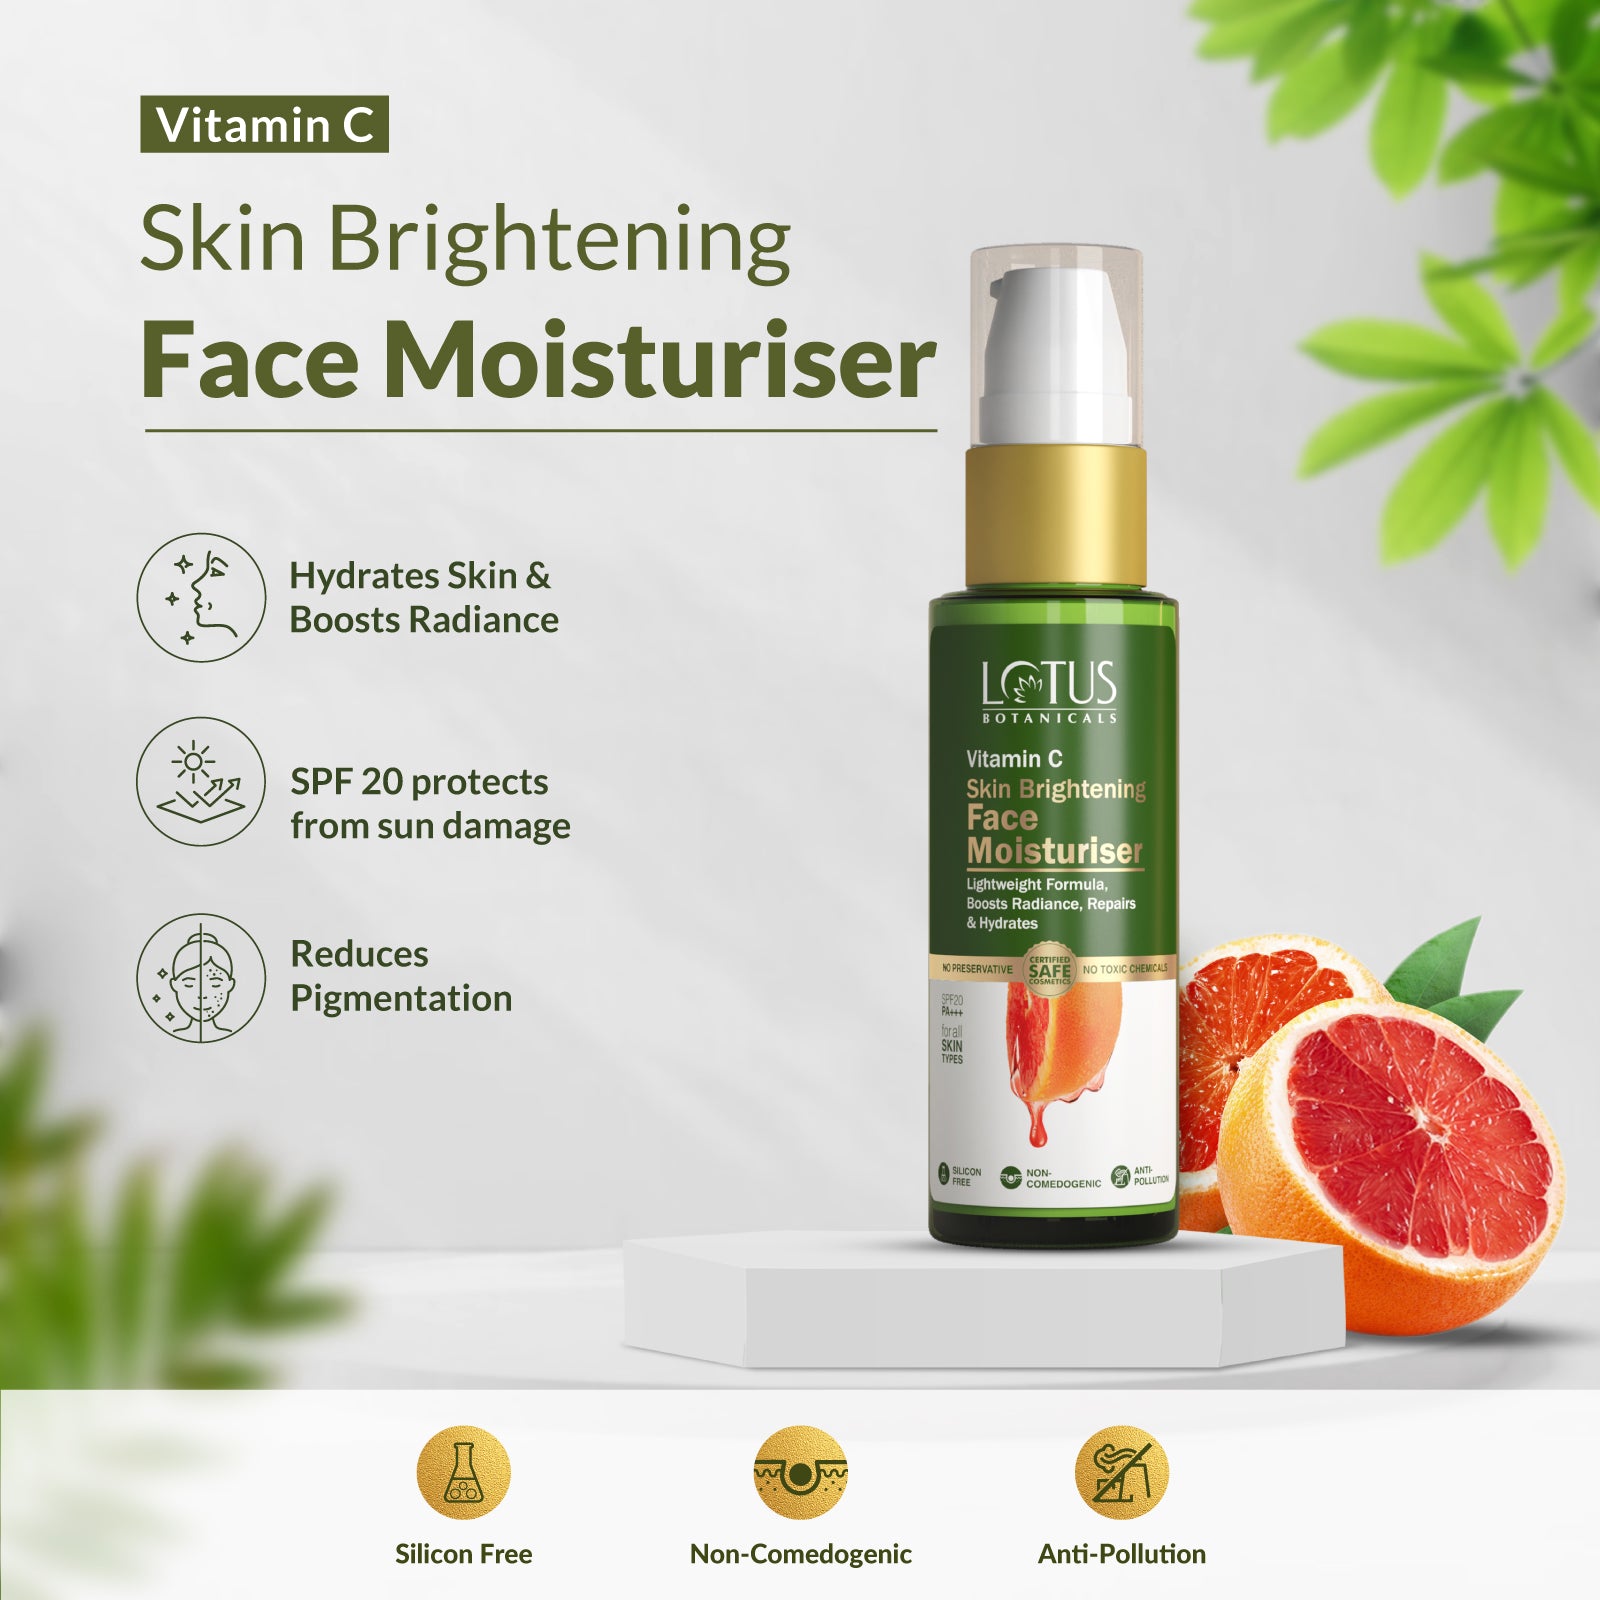 Vitamin C Skin Brightening and Renewing Kit - A Complete Solution for Radiant and Youthful Skin